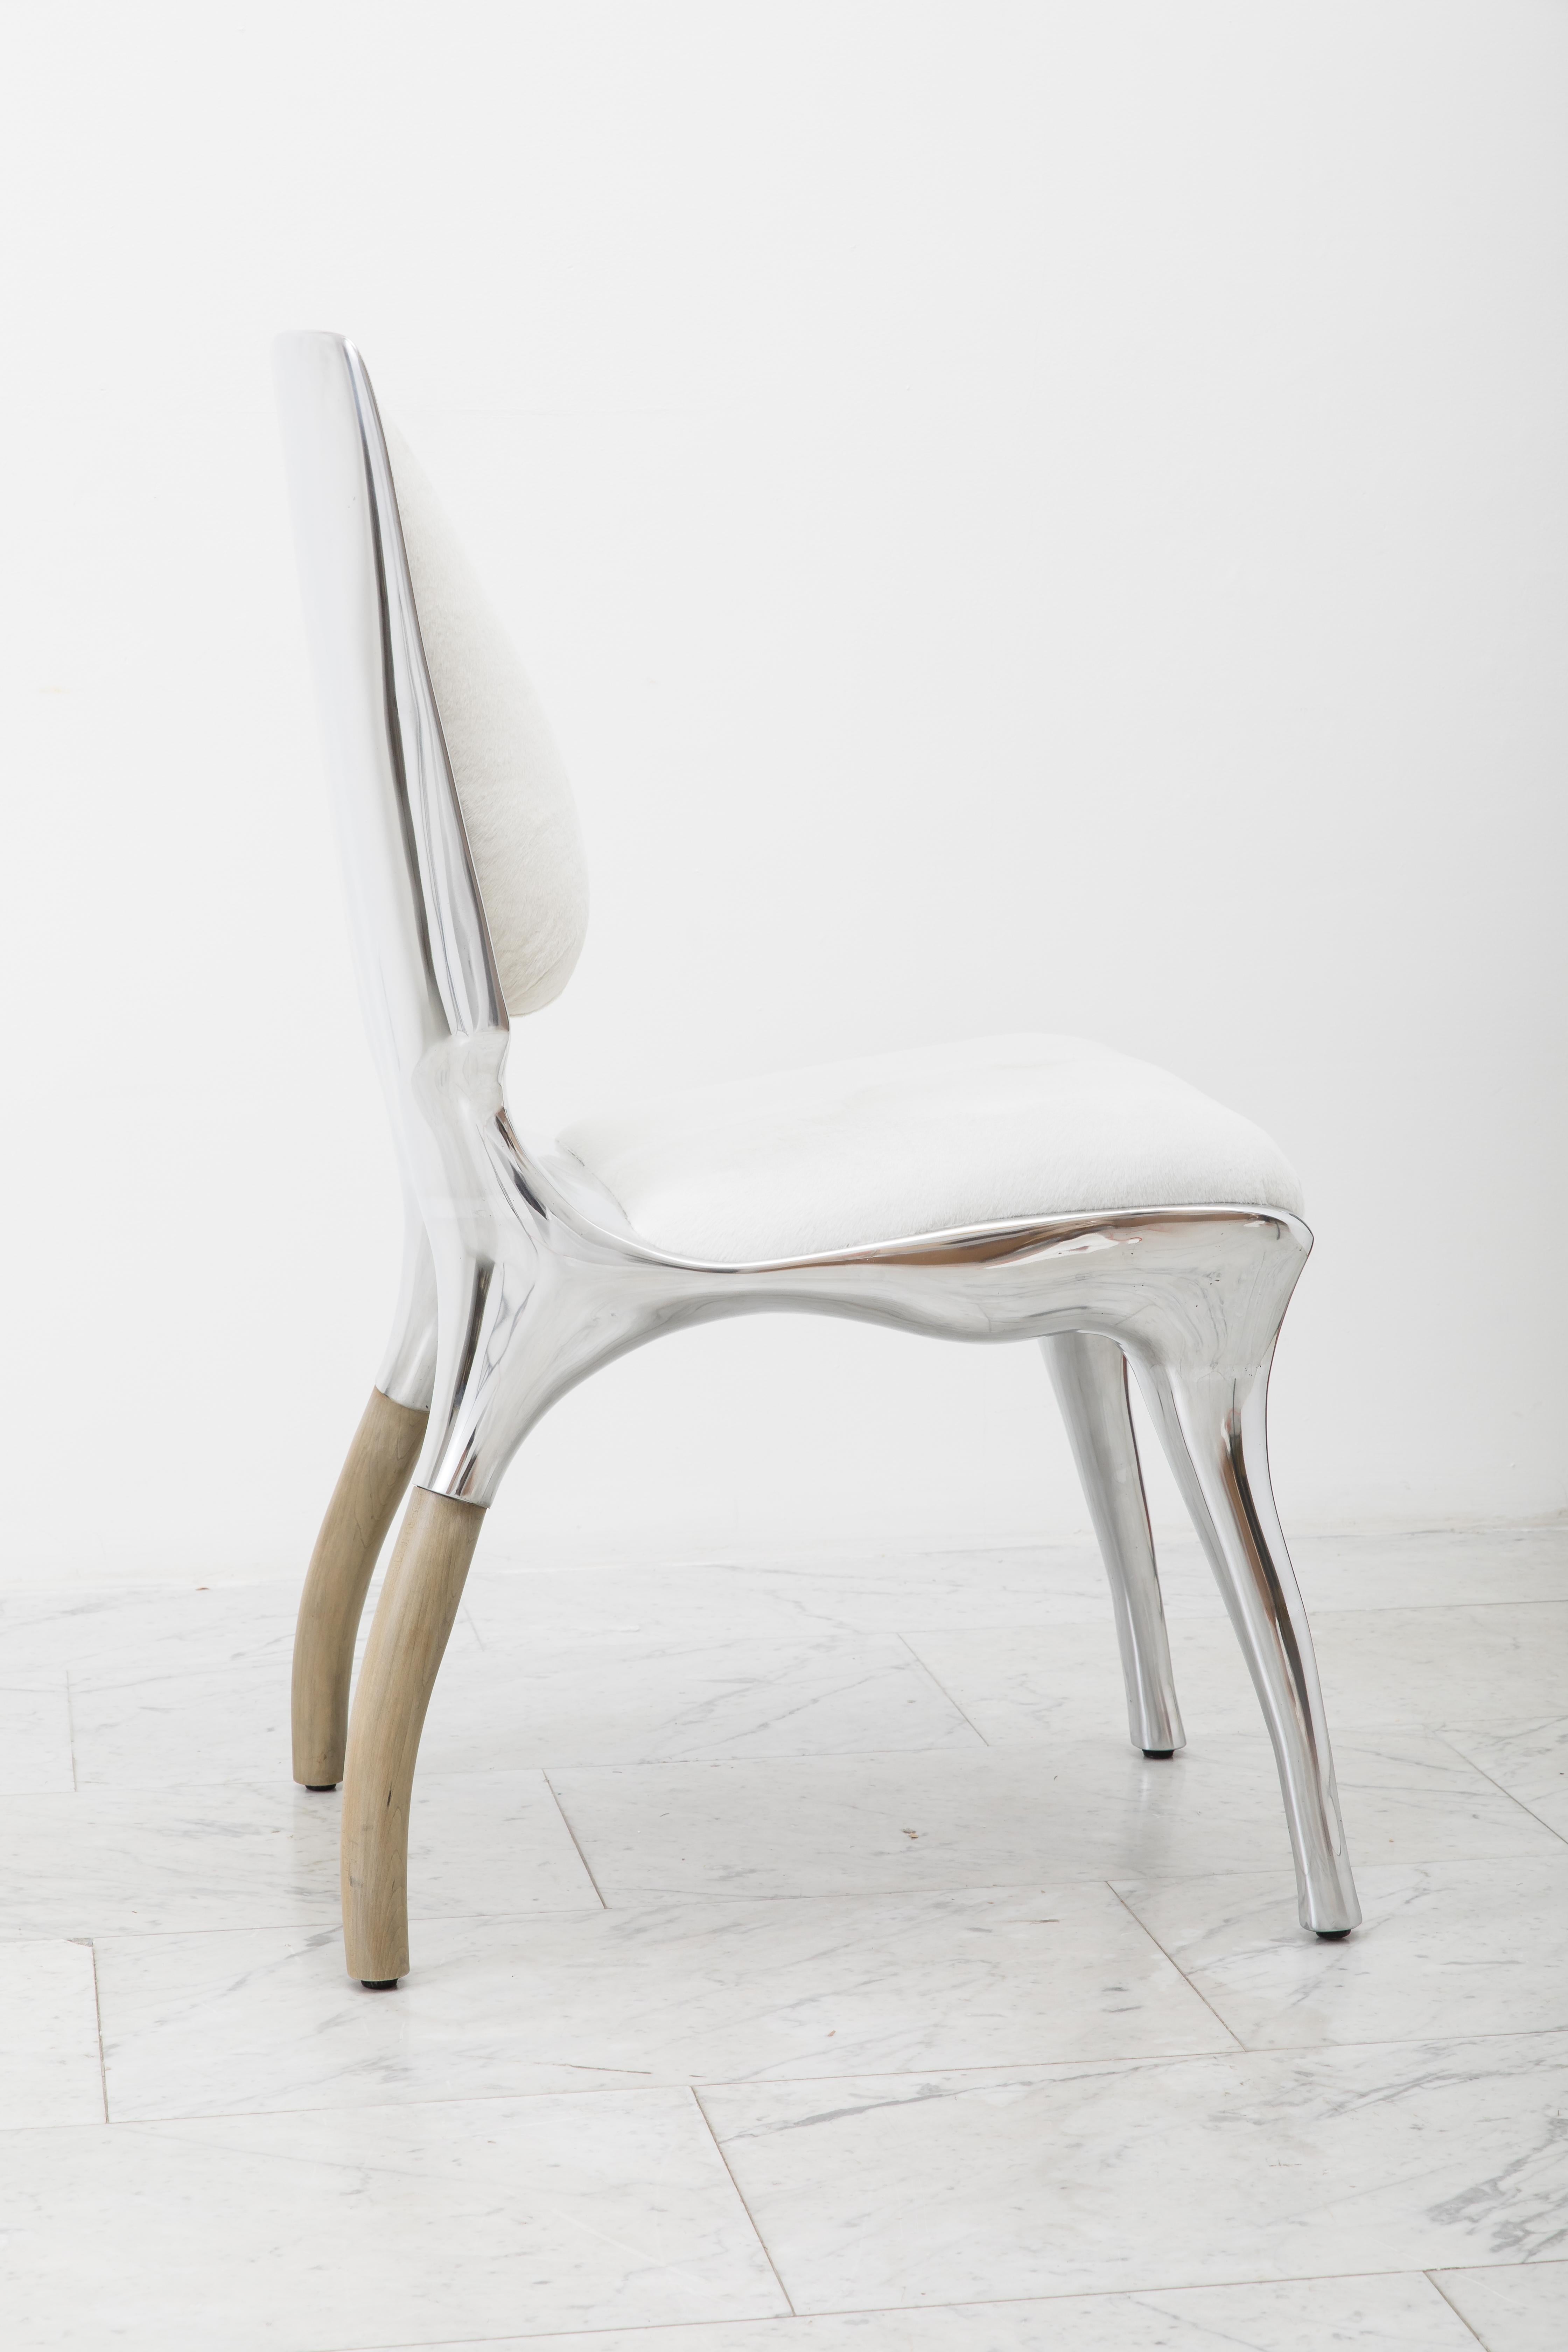 Alex Roskin, Tusk High Chair in Polished Aluminum, USA In New Condition For Sale In New York, NY